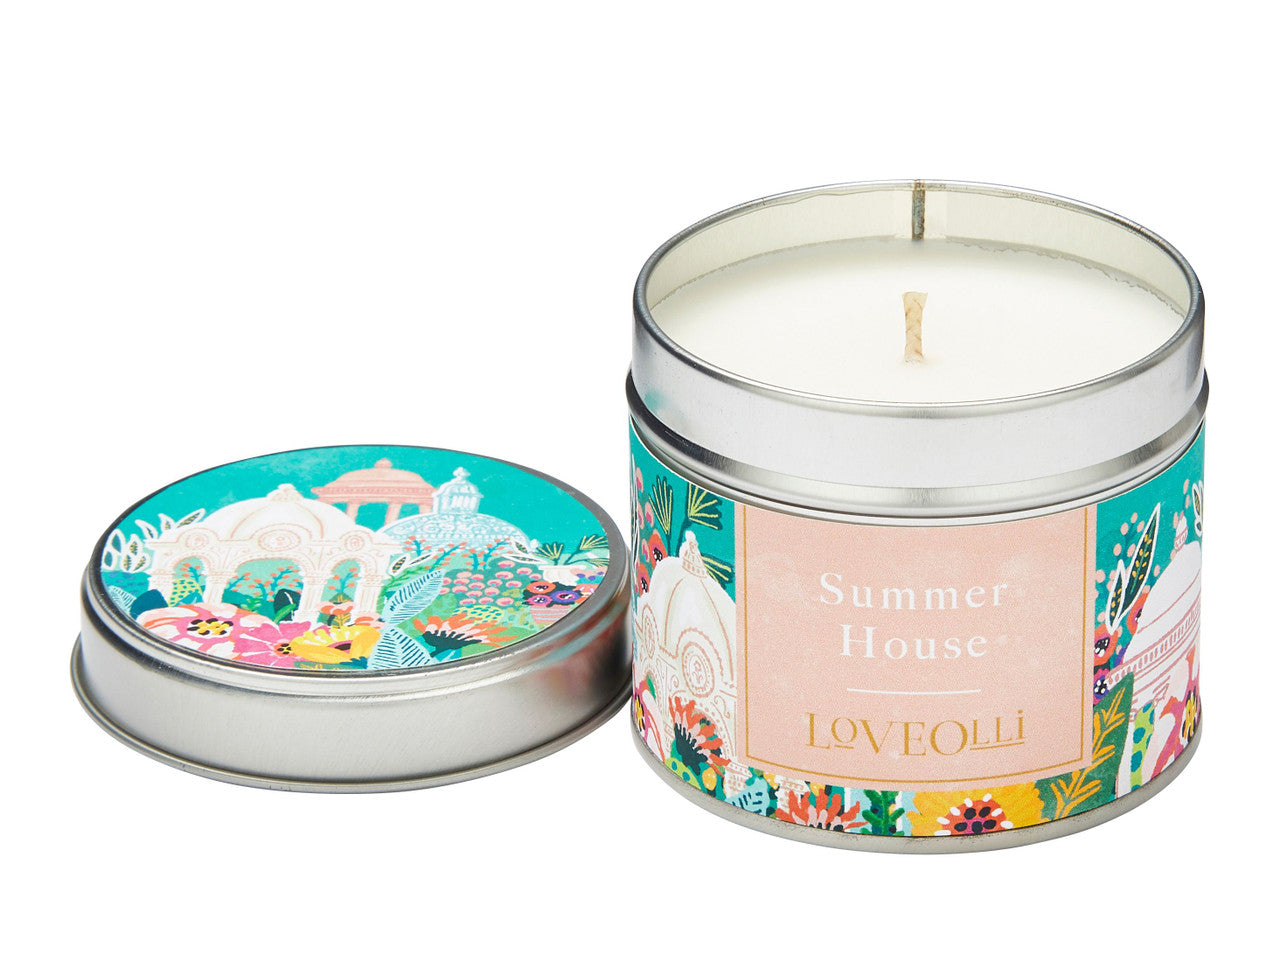 Love Olli Summer House scented tin candle. Hand poured in the UK.